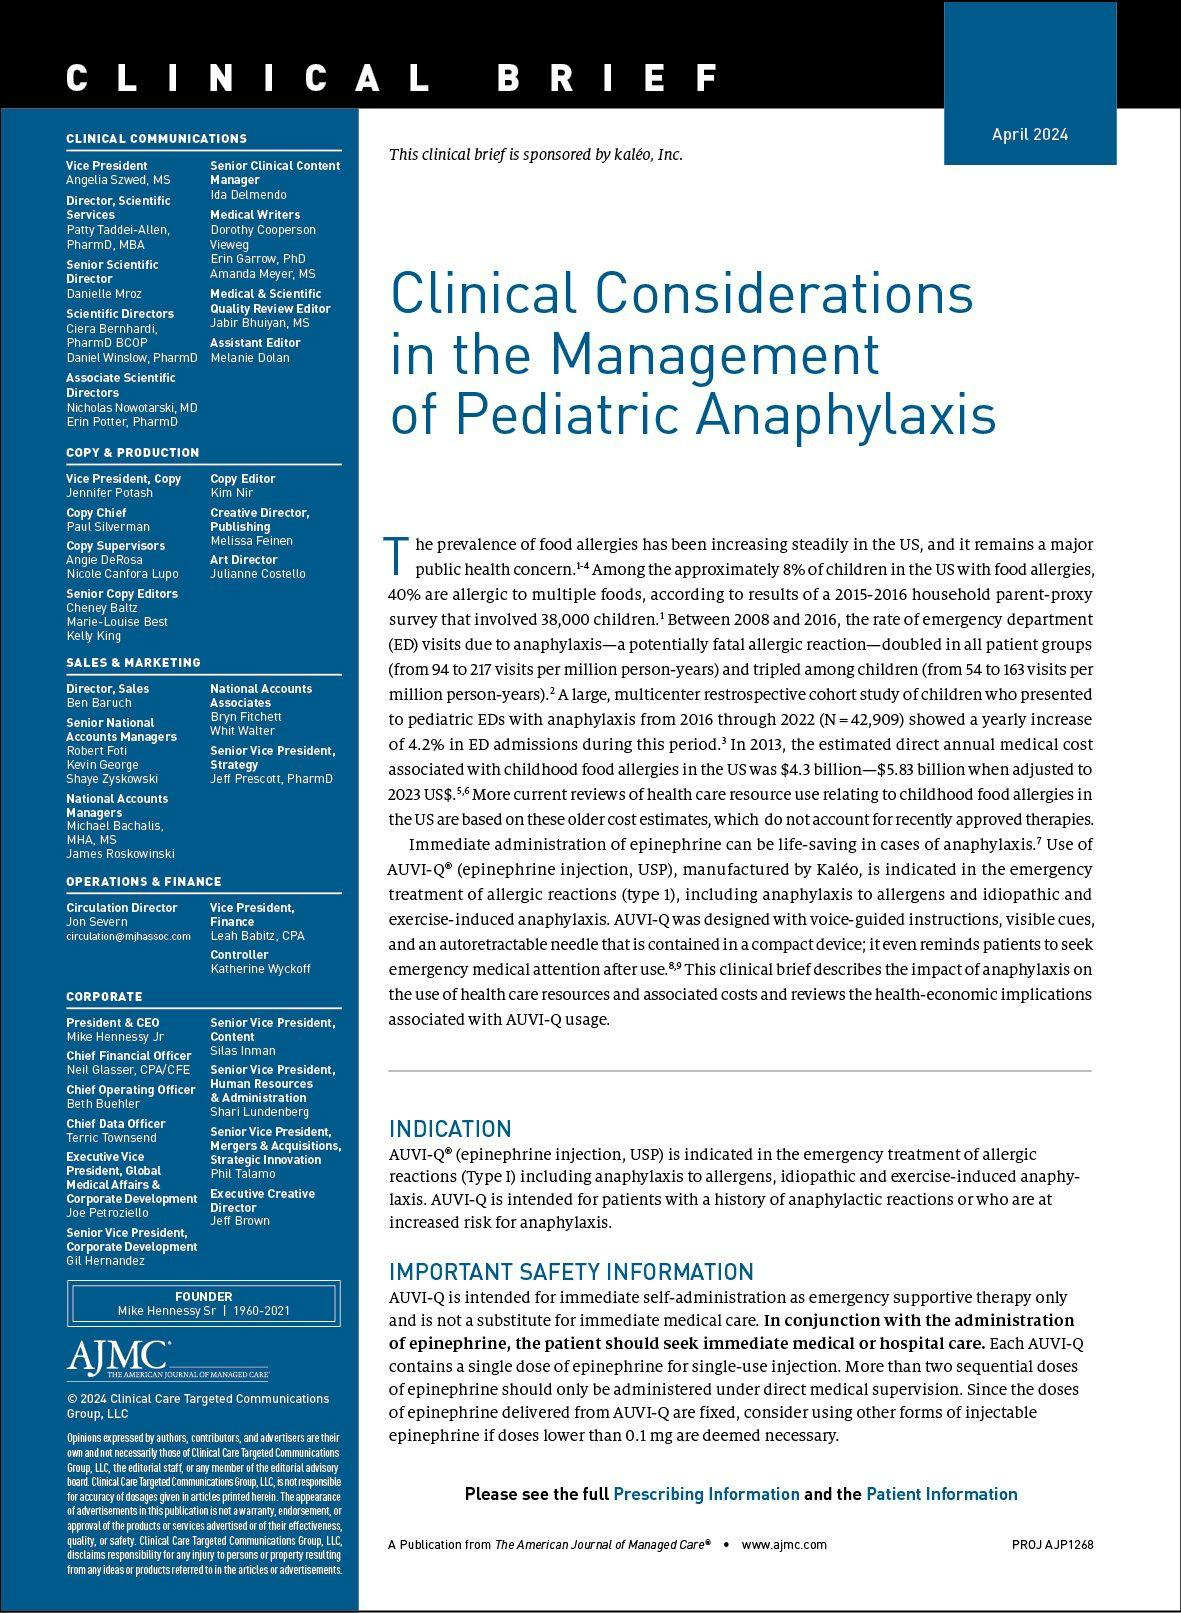 Clinical Considerations in the Management of Pediatric Anaphylaxis